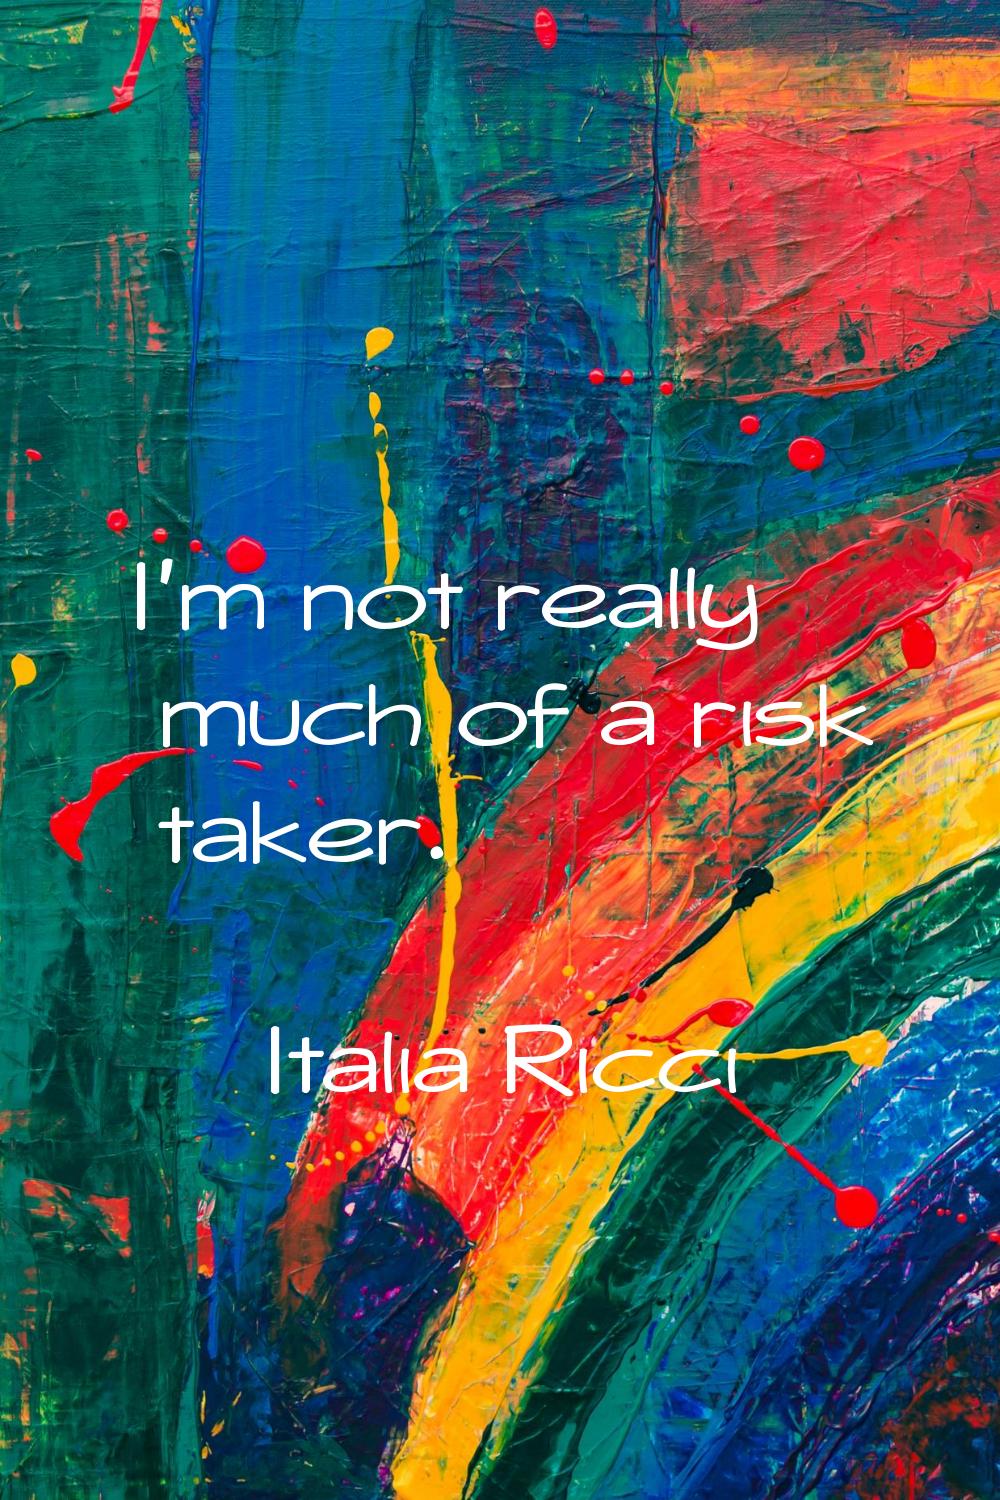 I'm not really much of a risk taker.